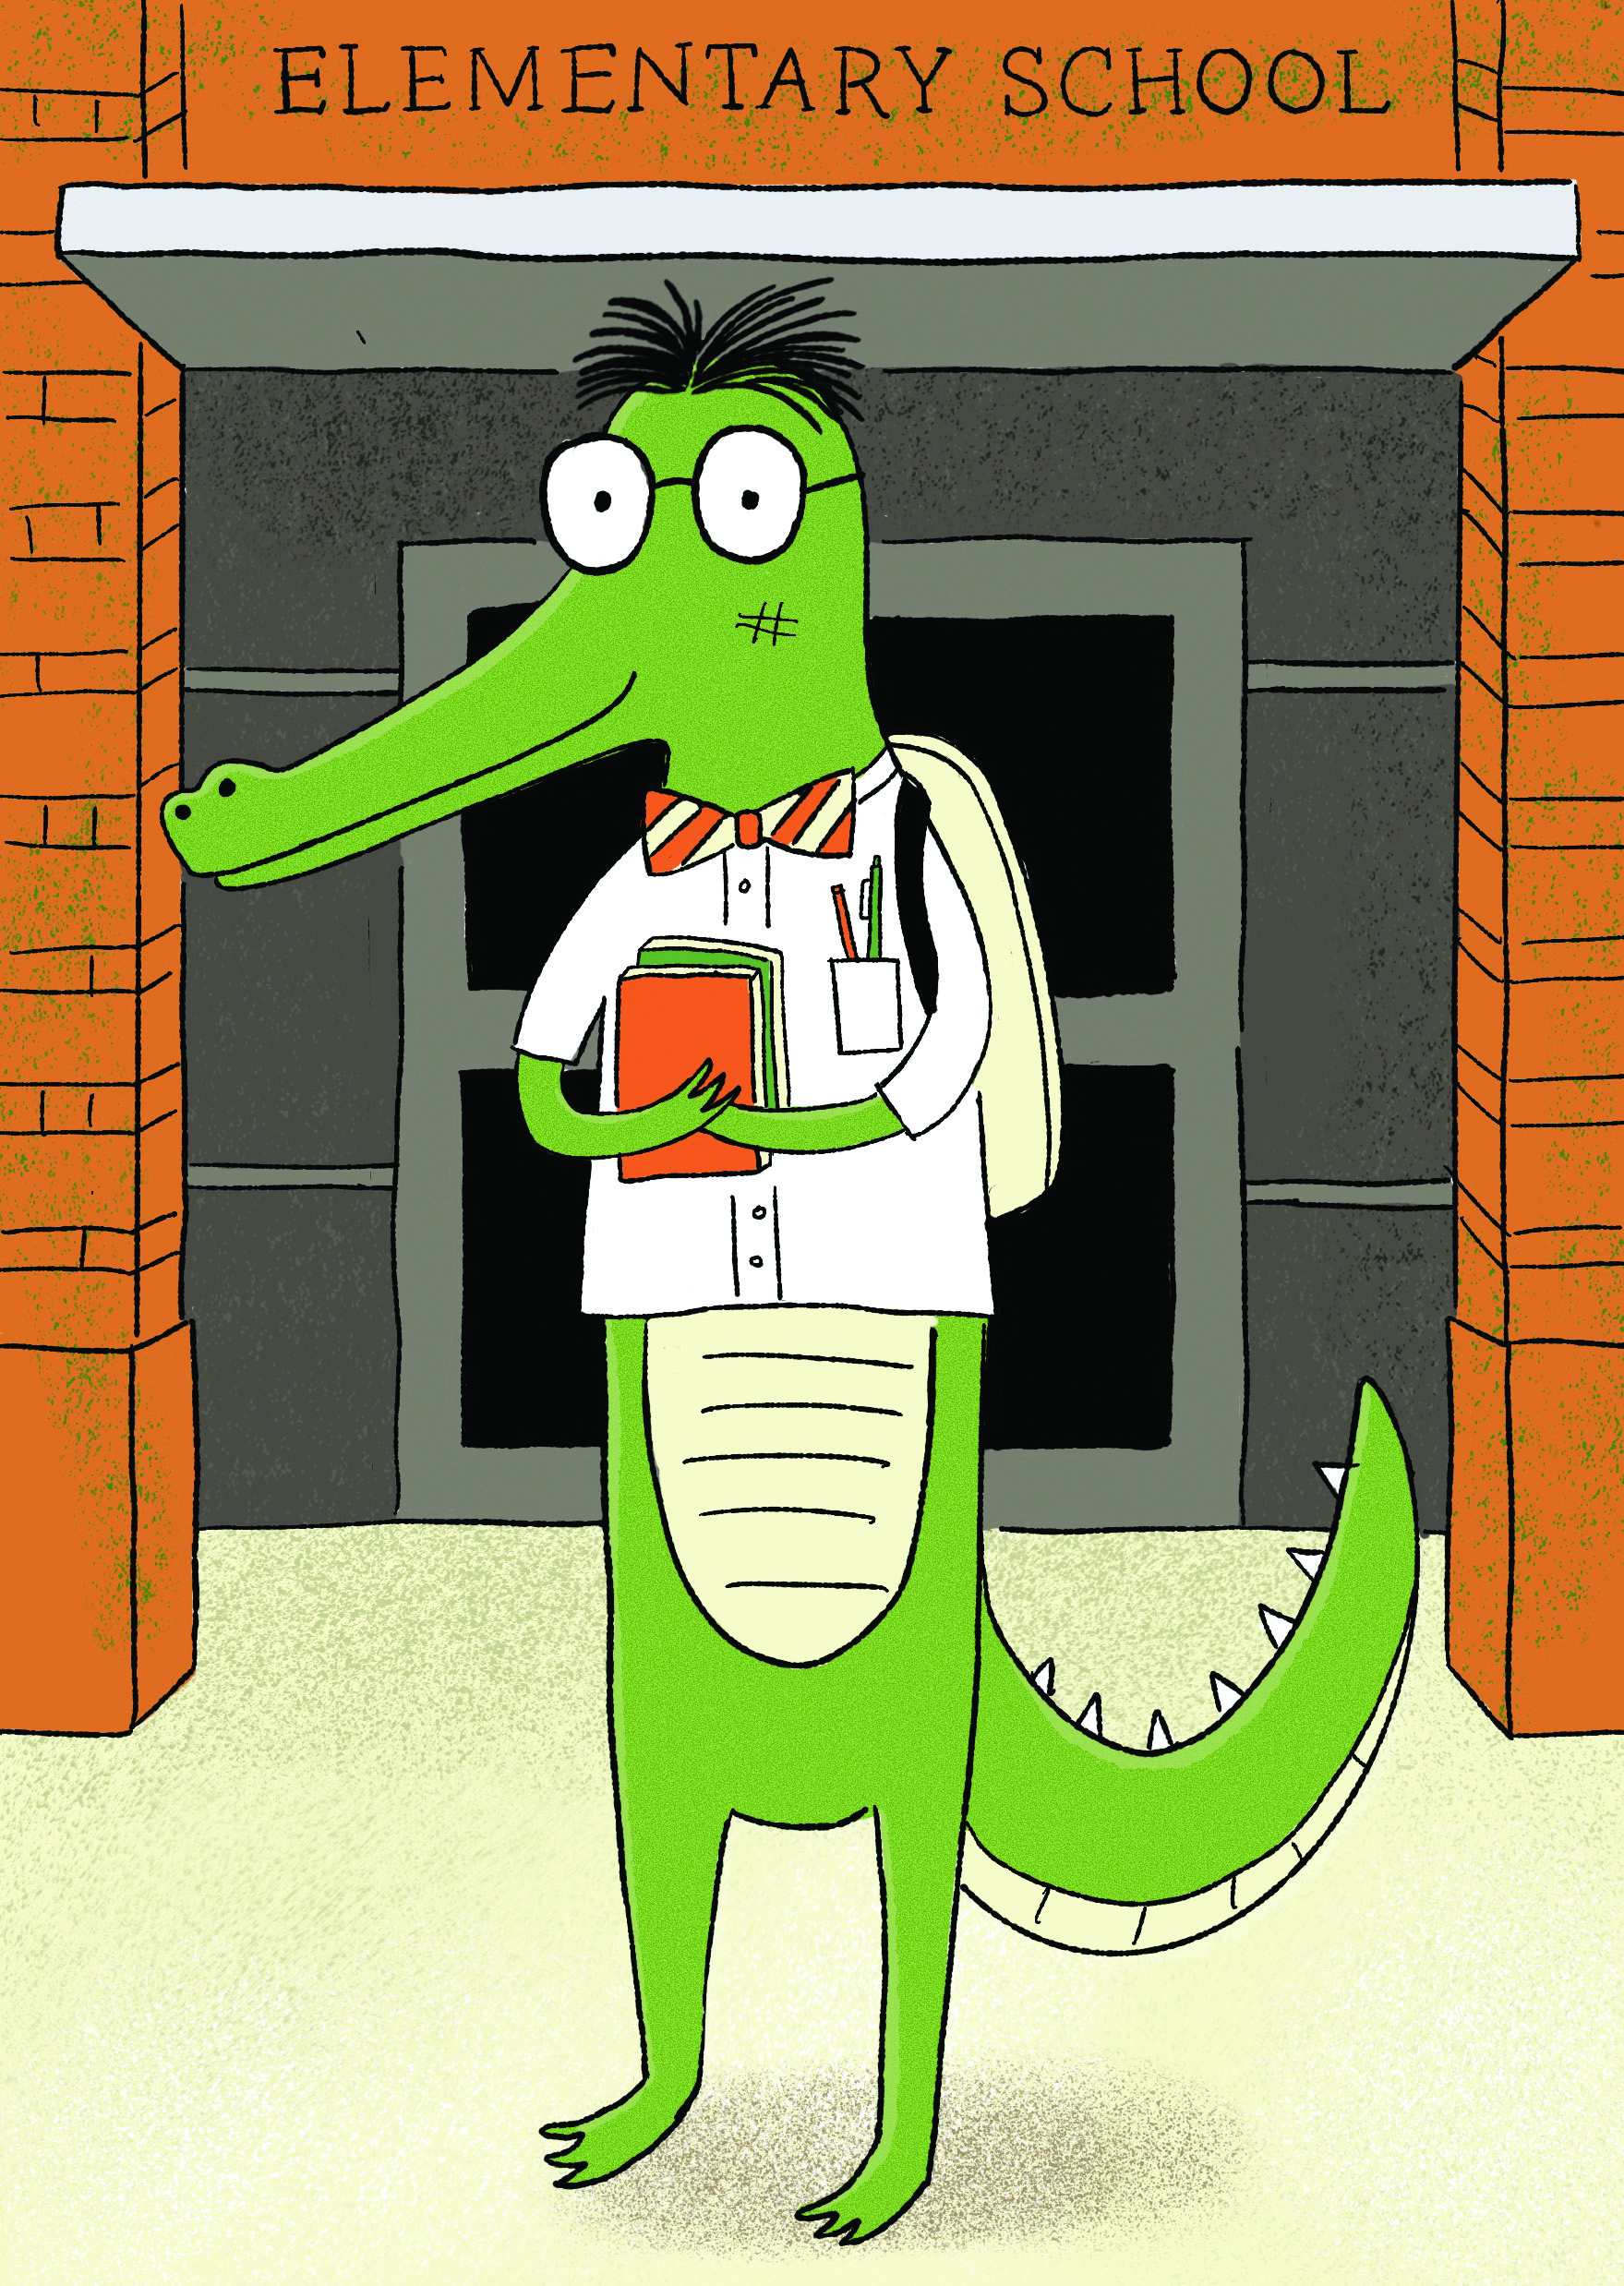 A cartoon drawing of a "nerdy" alligator standing on two legs, complete with messy haircut, nerd glasses, a bow tie, and pens inside a button down white shirt. The alligator is holding books and standing at the front entrance of an elementary school.